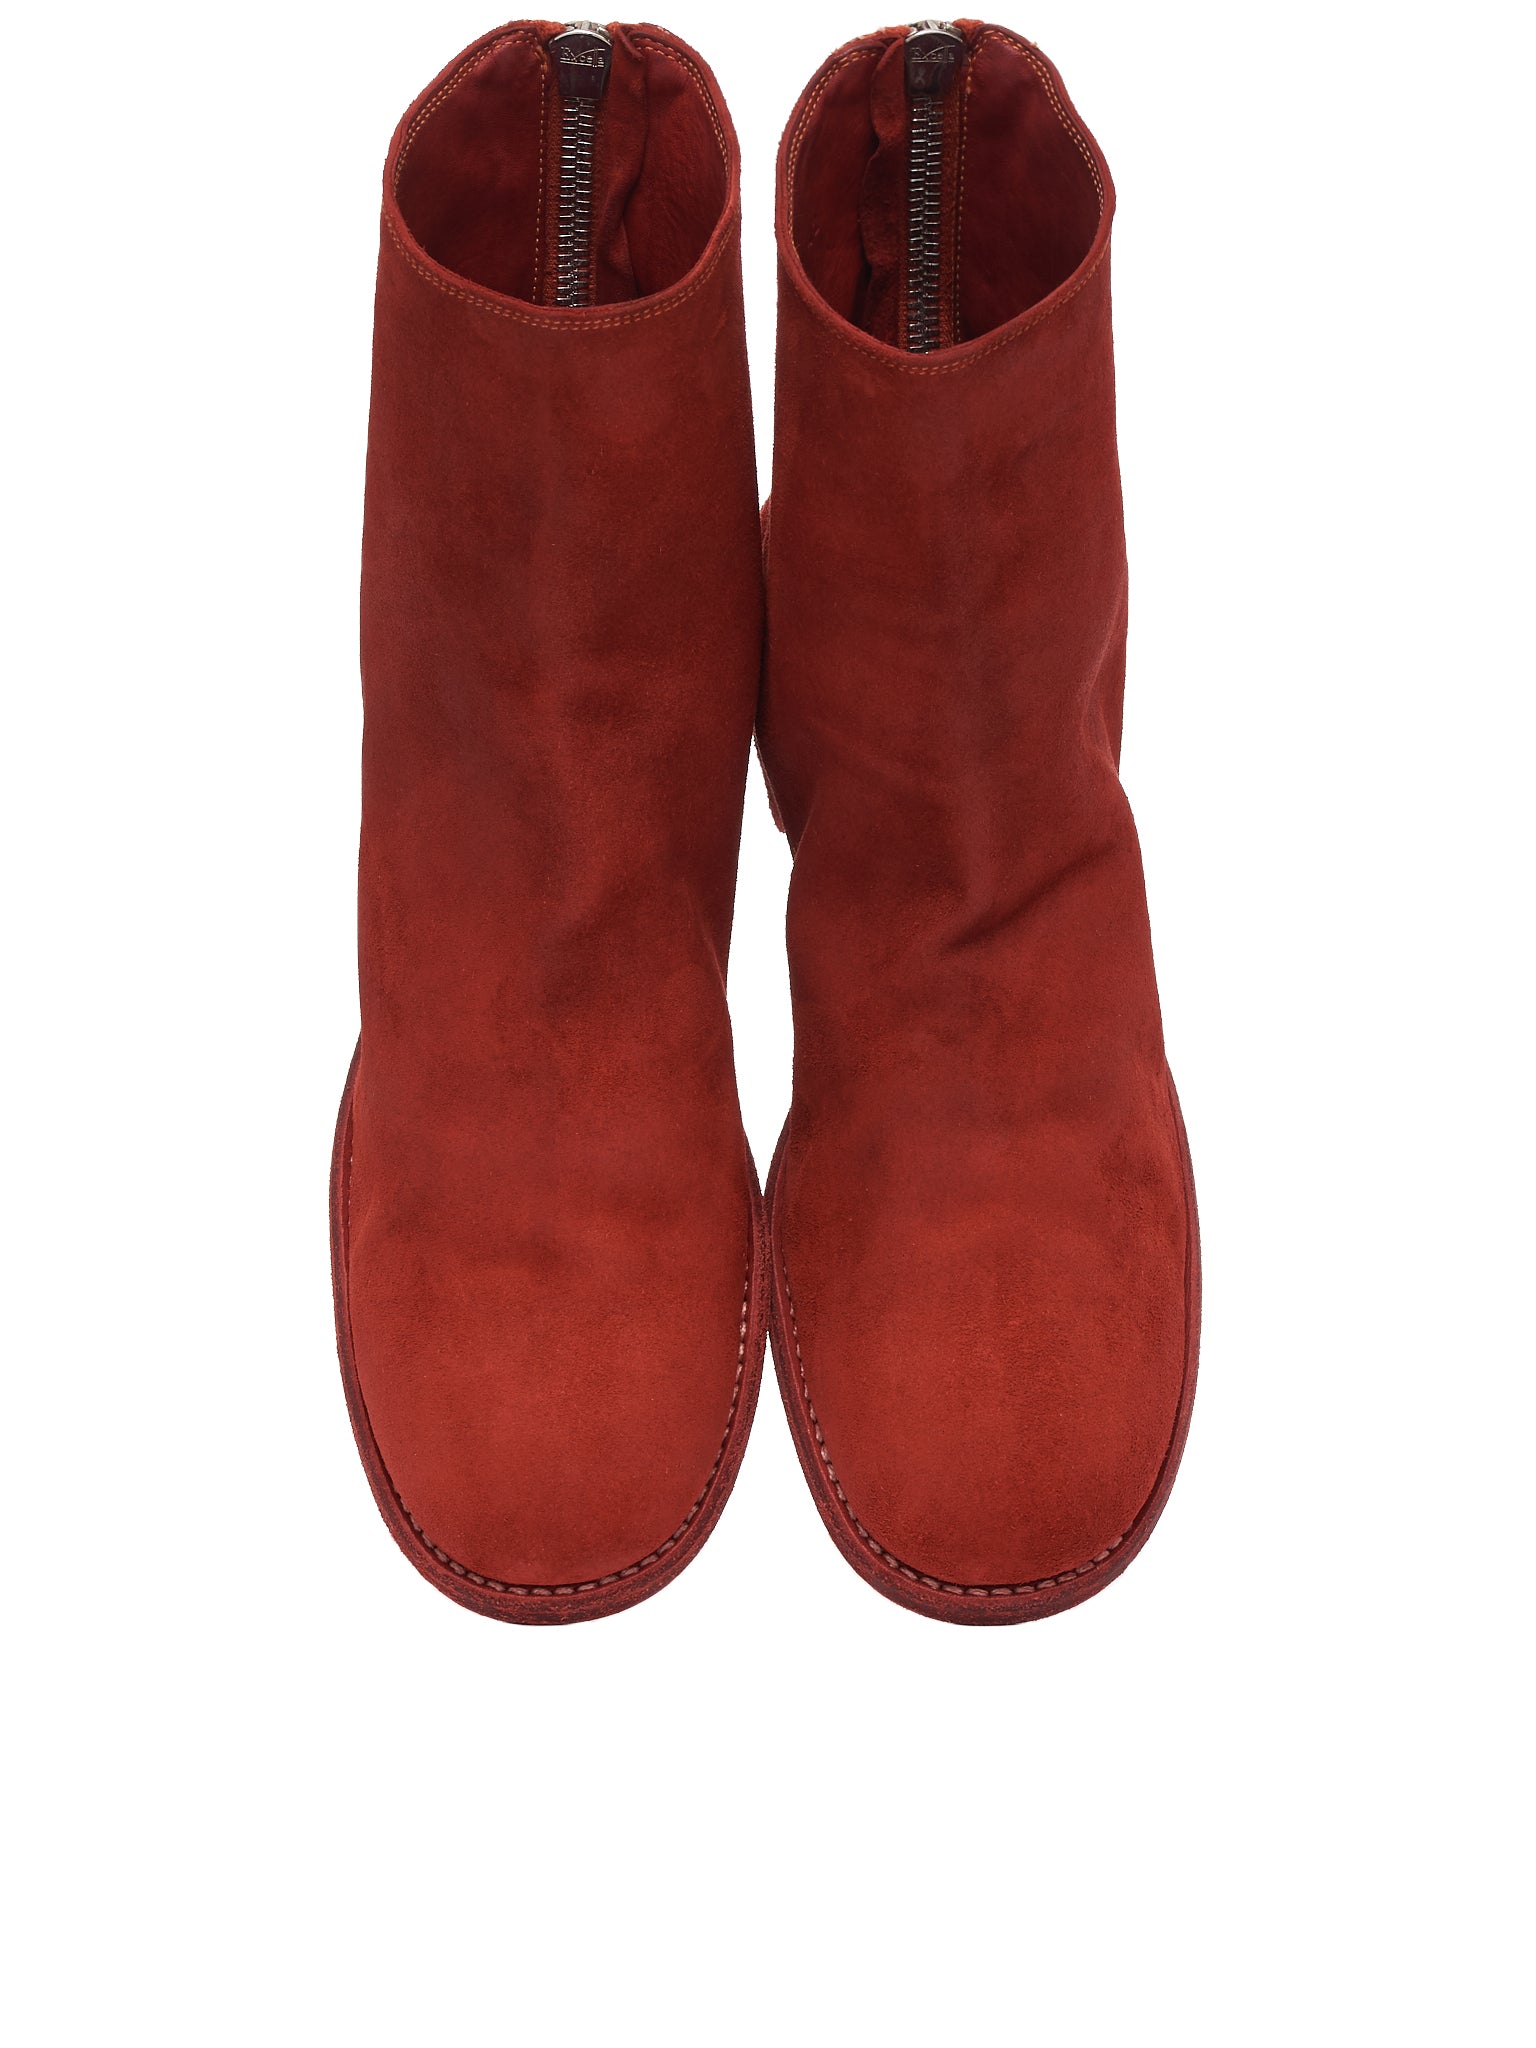 Match politik velfærd 986 Horse Leather Zip Boots (986-HORSE-REVERSE-1006T-RED)